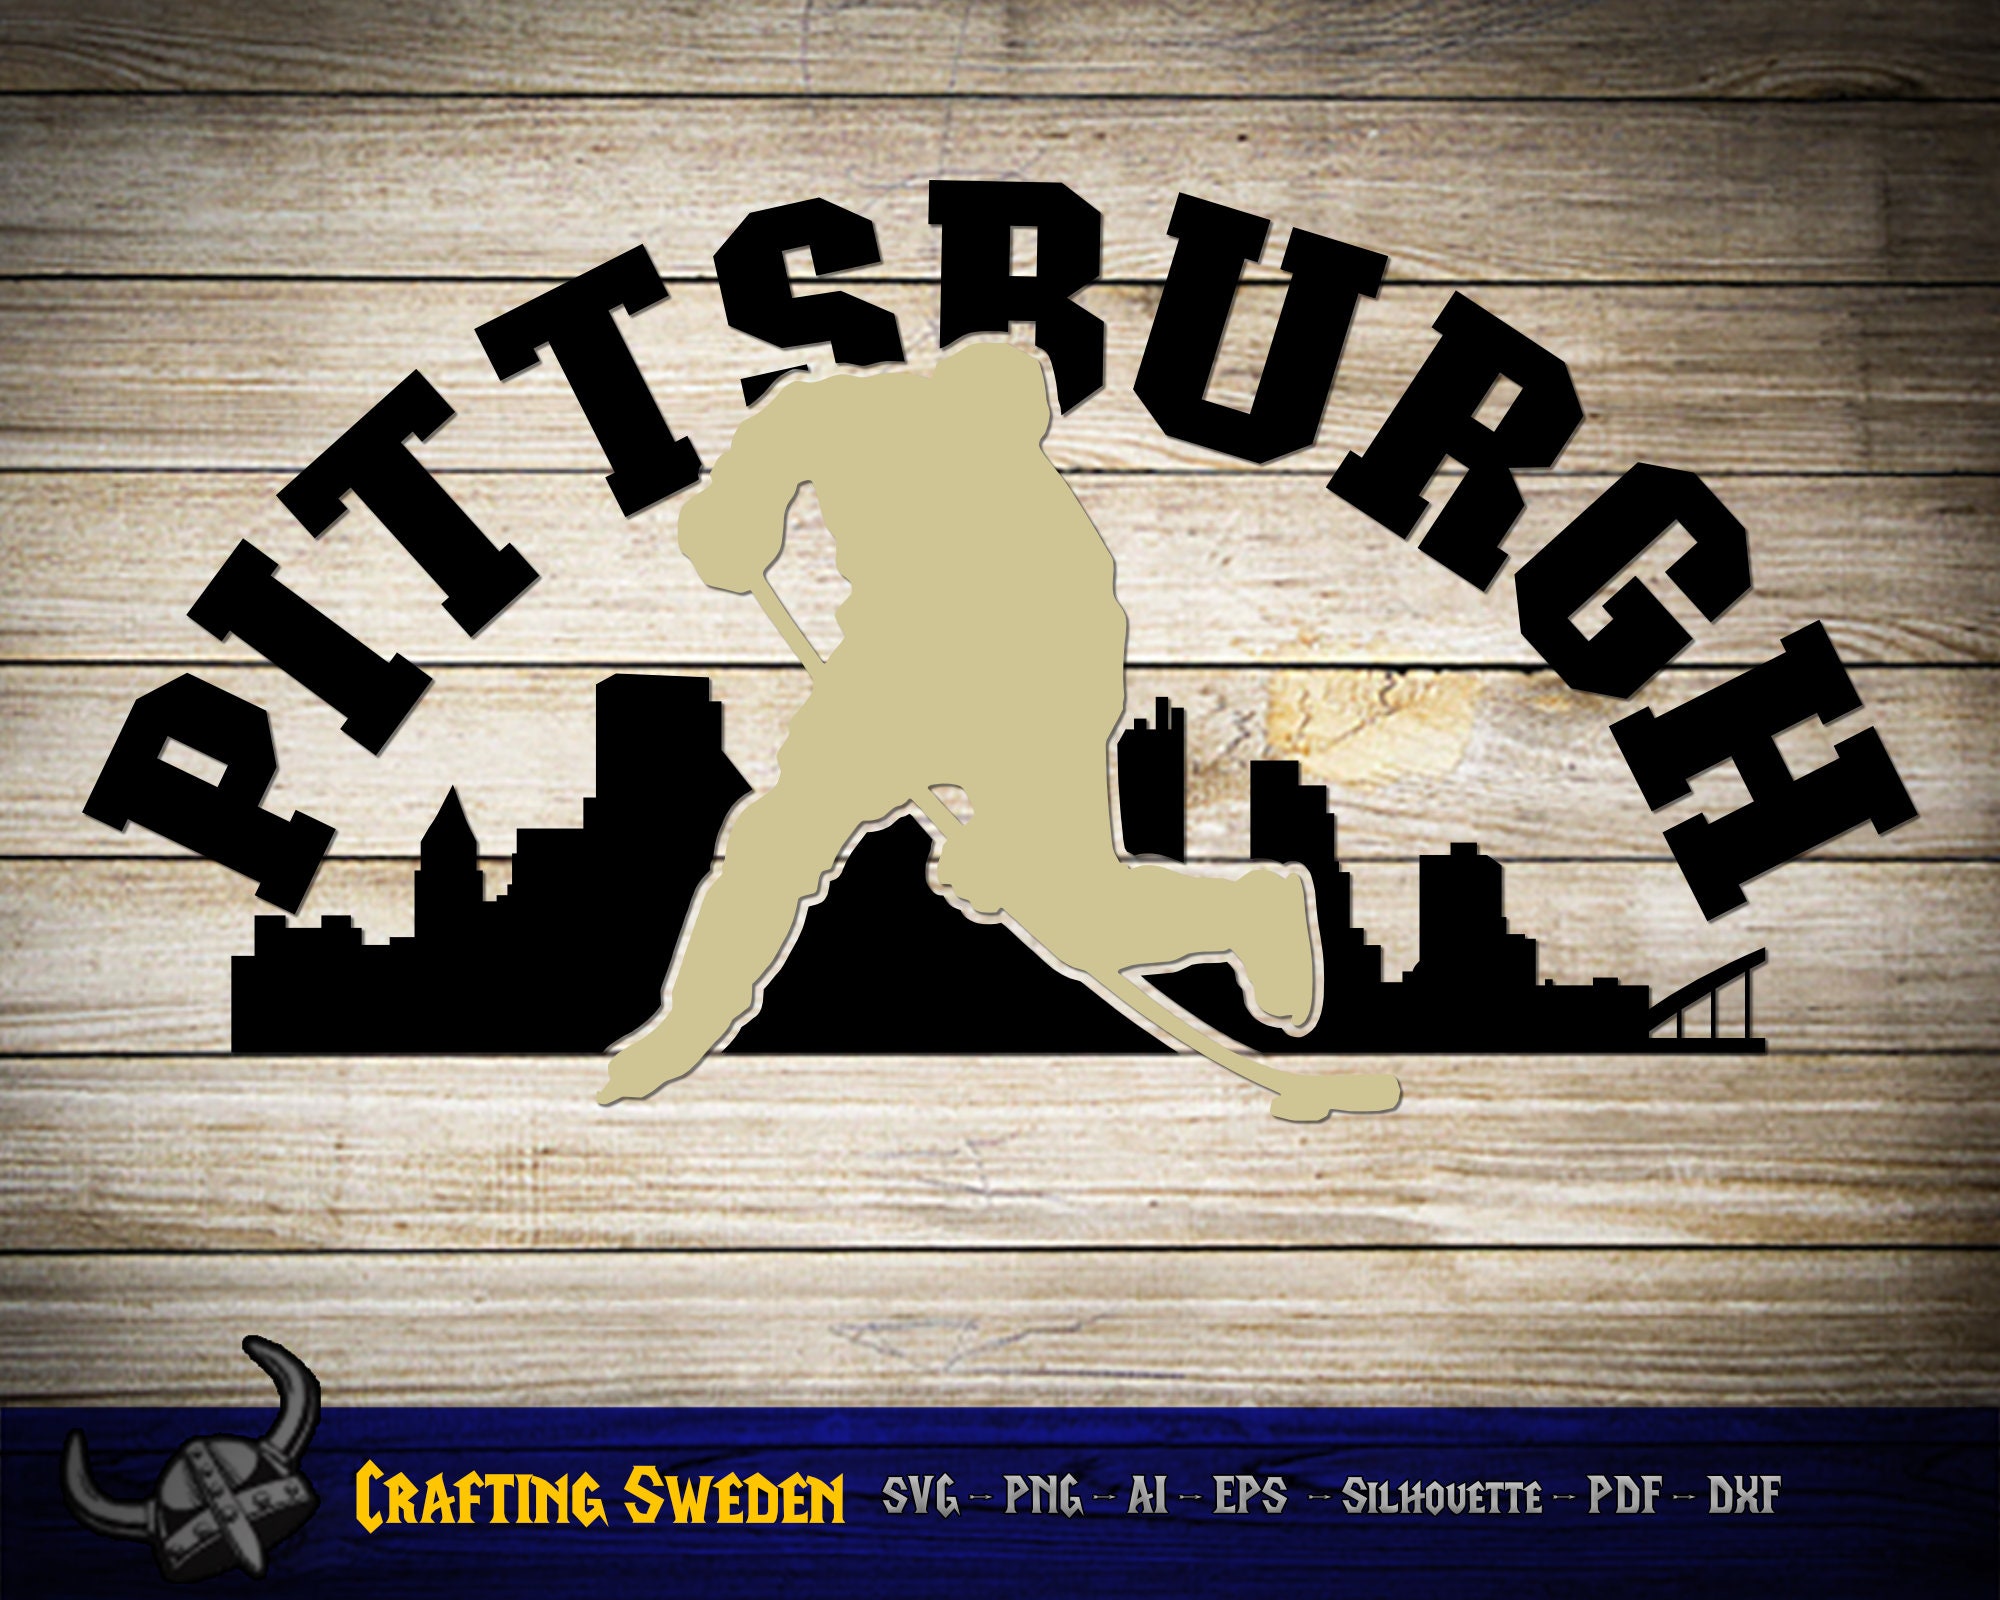 NHL Pittsburgh Penguins, Pittsburgh Penguins SVG Vector, Pittsburgh  Penguins Clipart, Pittsburgh Penguins Ice Hockey Kit SVG, DXF, PNG, EPS  Instant Download NHL-Files For Silhouette, Files For Clipping. - Gravectory